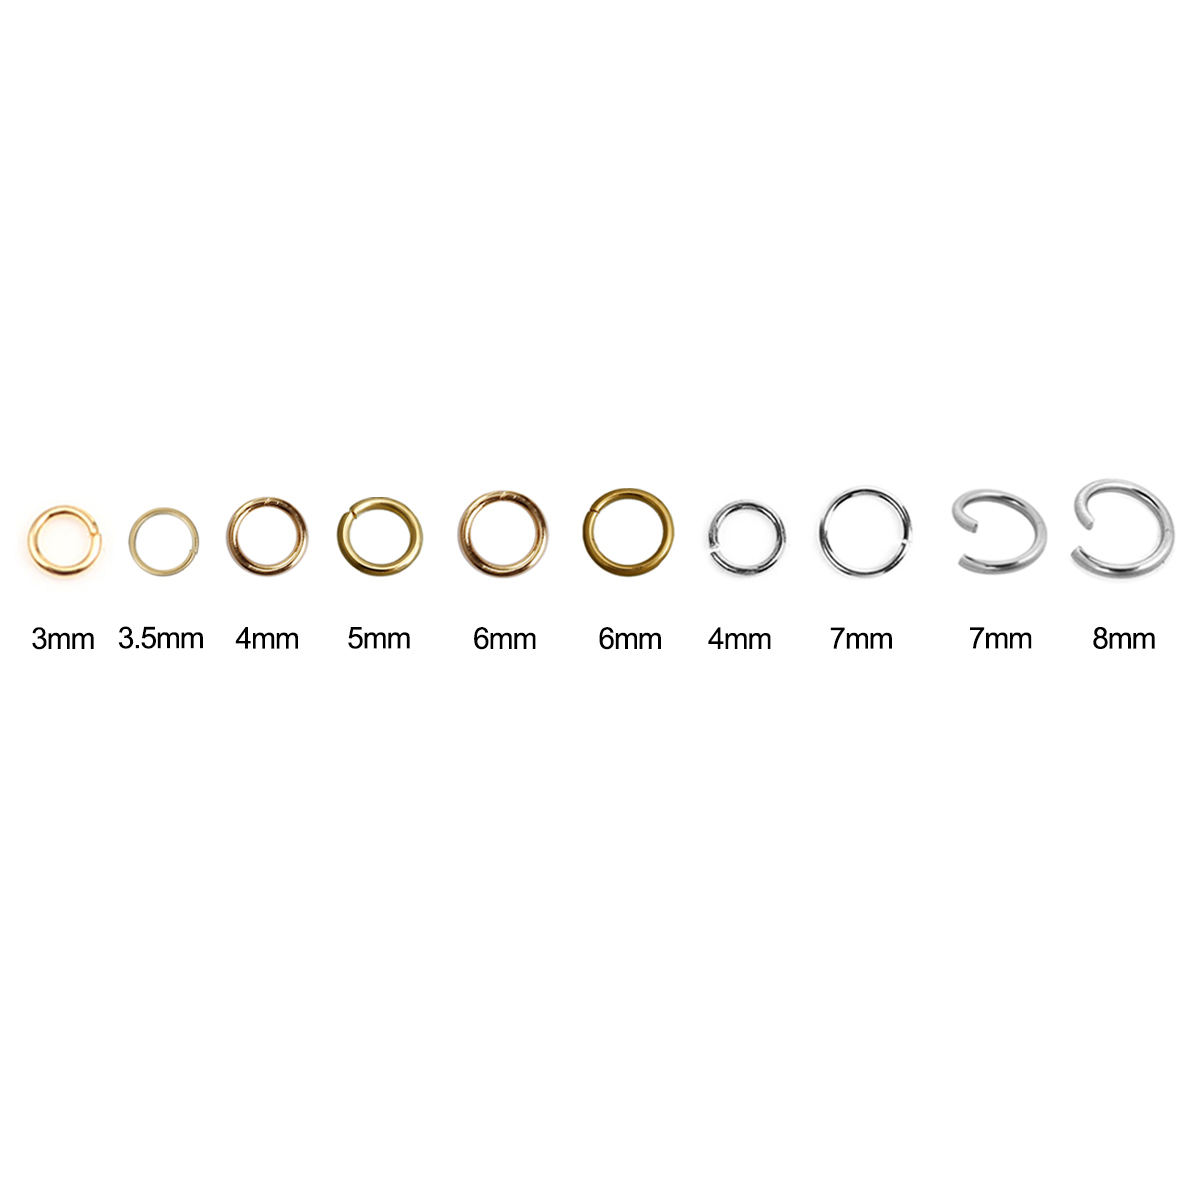 Picture of Stainless Steel Opened Jump Rings Findings Round Gold Plated 4mm( 1/8") Dia., 50 PCs